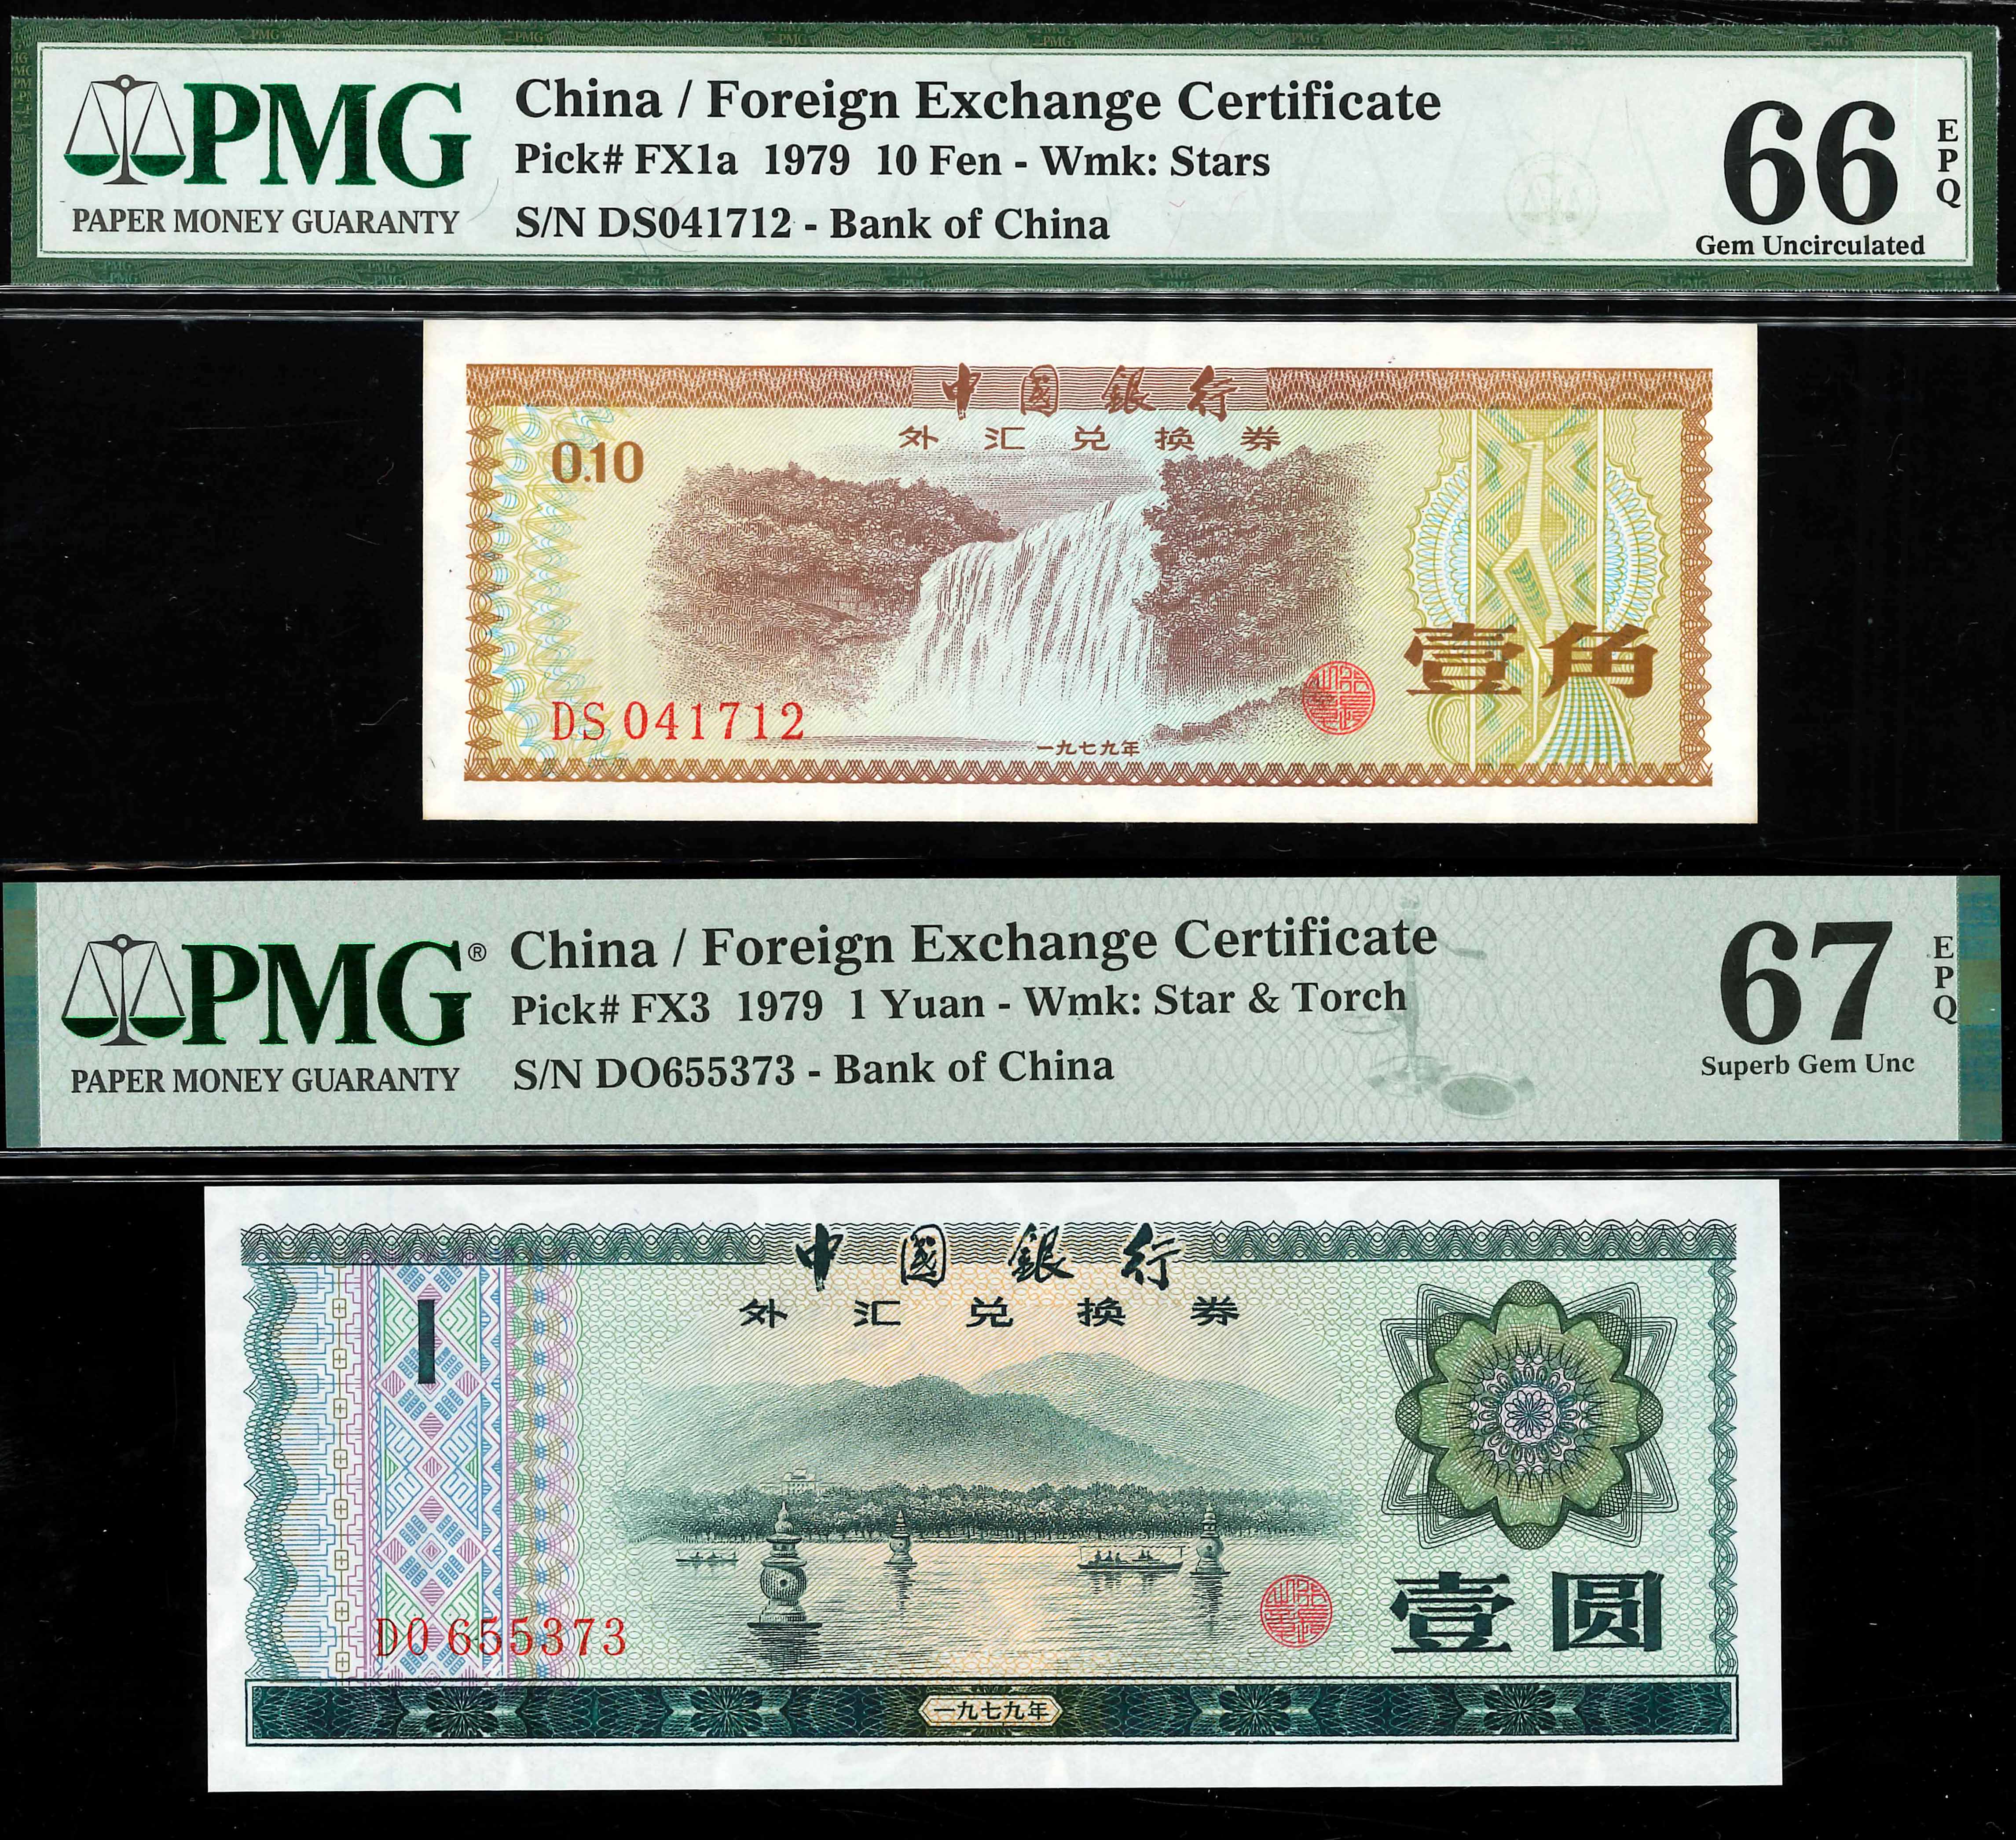 China, 1979, 10 Fen/1 Yuan, Foreign Exchange Certificate, P-FX1a 